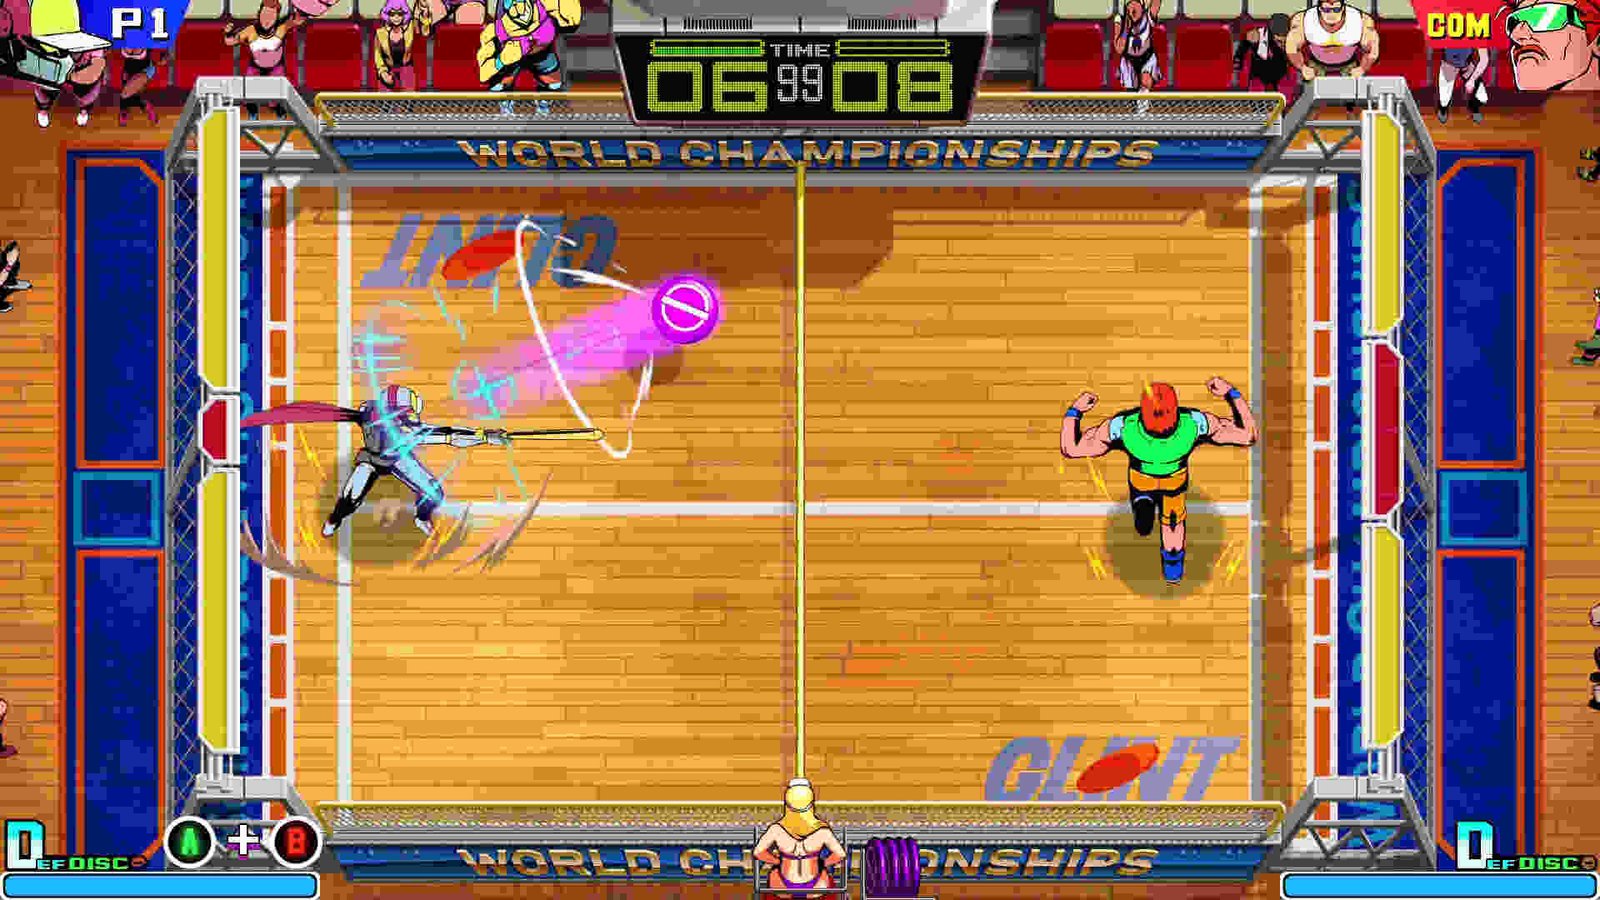 Windjammers 3 Release Date: When it will be available